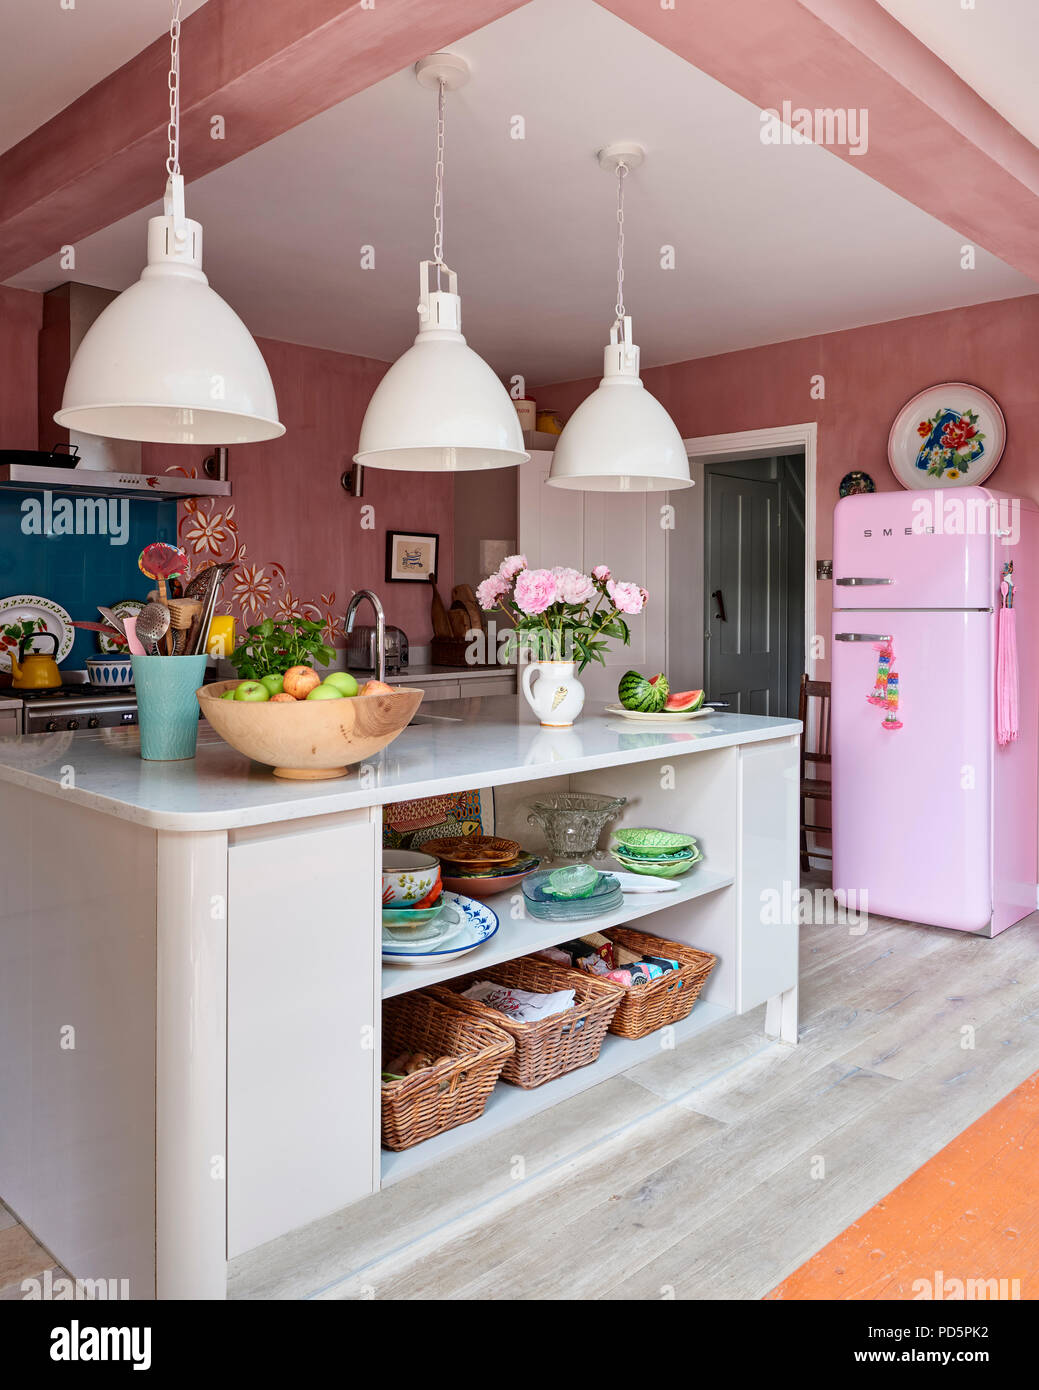 Large industrial style pendant lights and a pink Smeg fridge in light kitchen with walls painted in Authentico's Venetian Pink Chalk Stock Photo